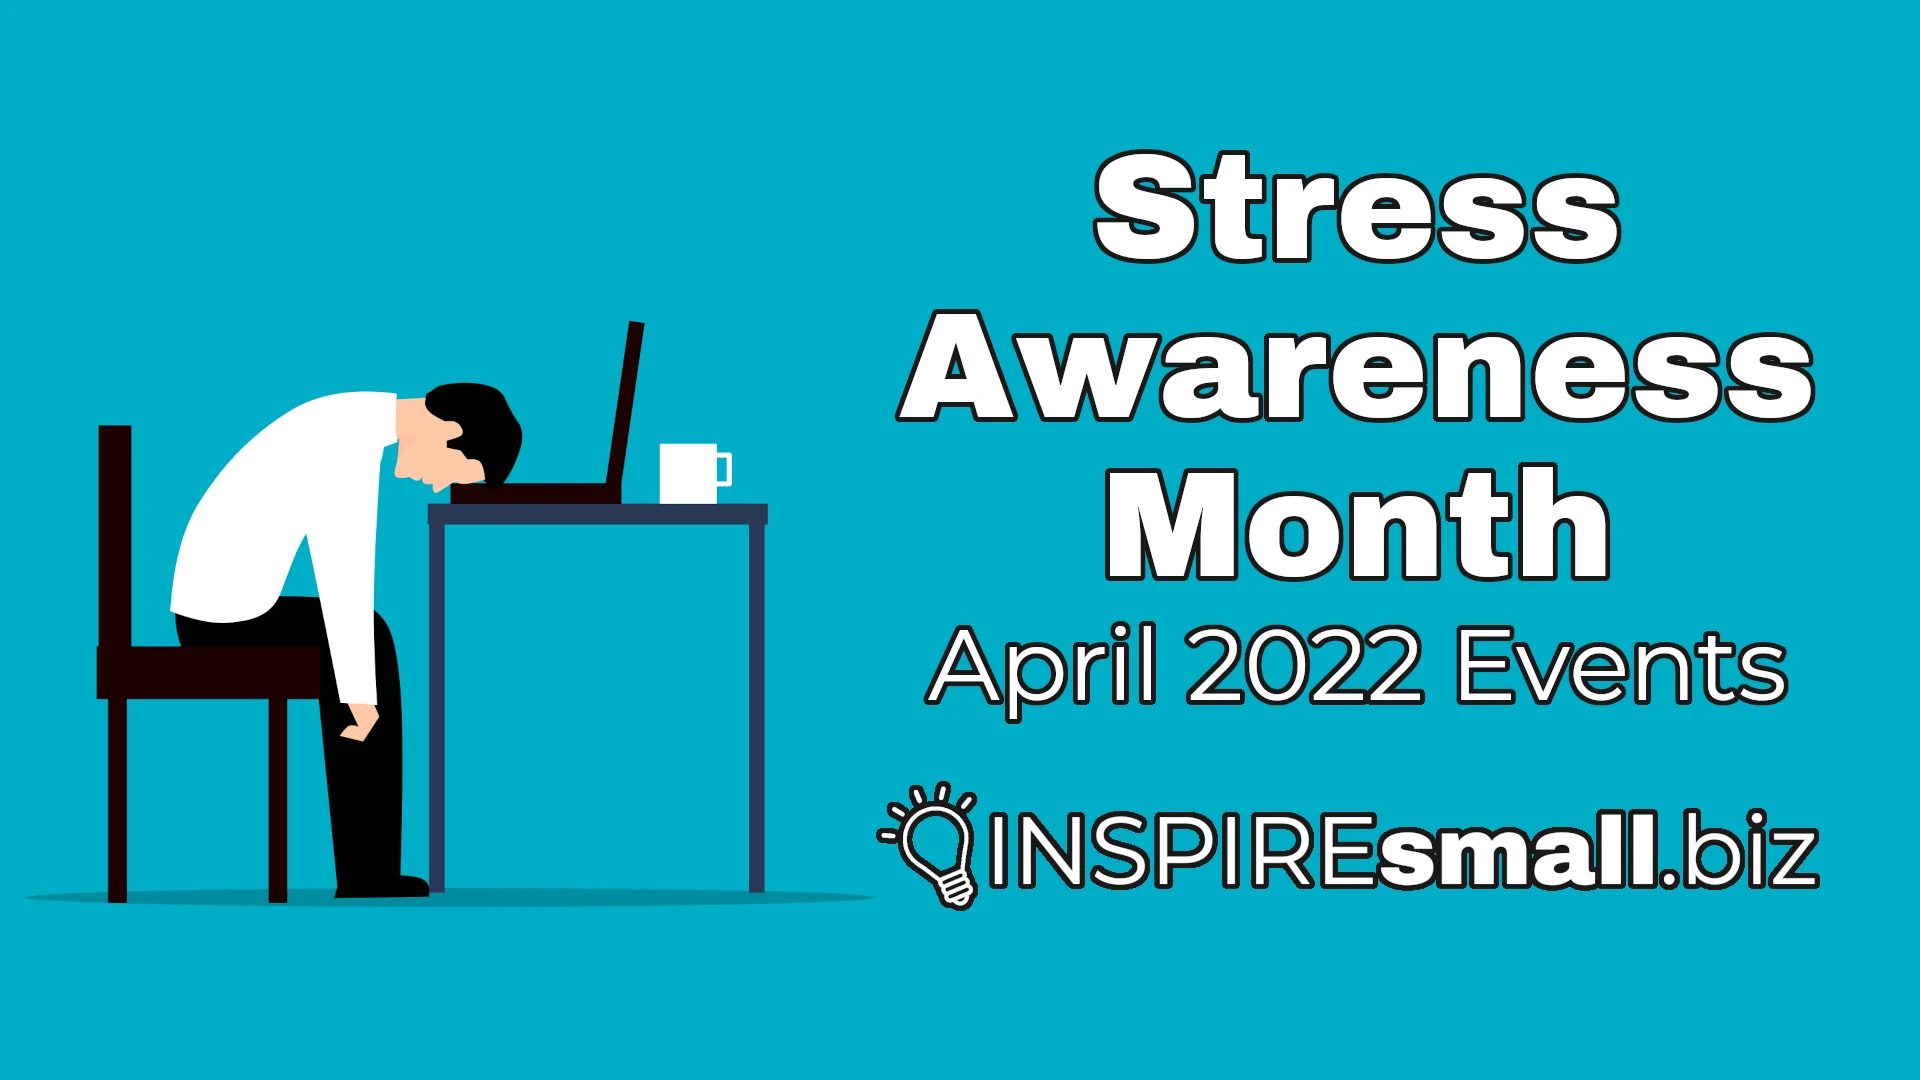 Stress Awareness Month: April 2022 Networking & Events